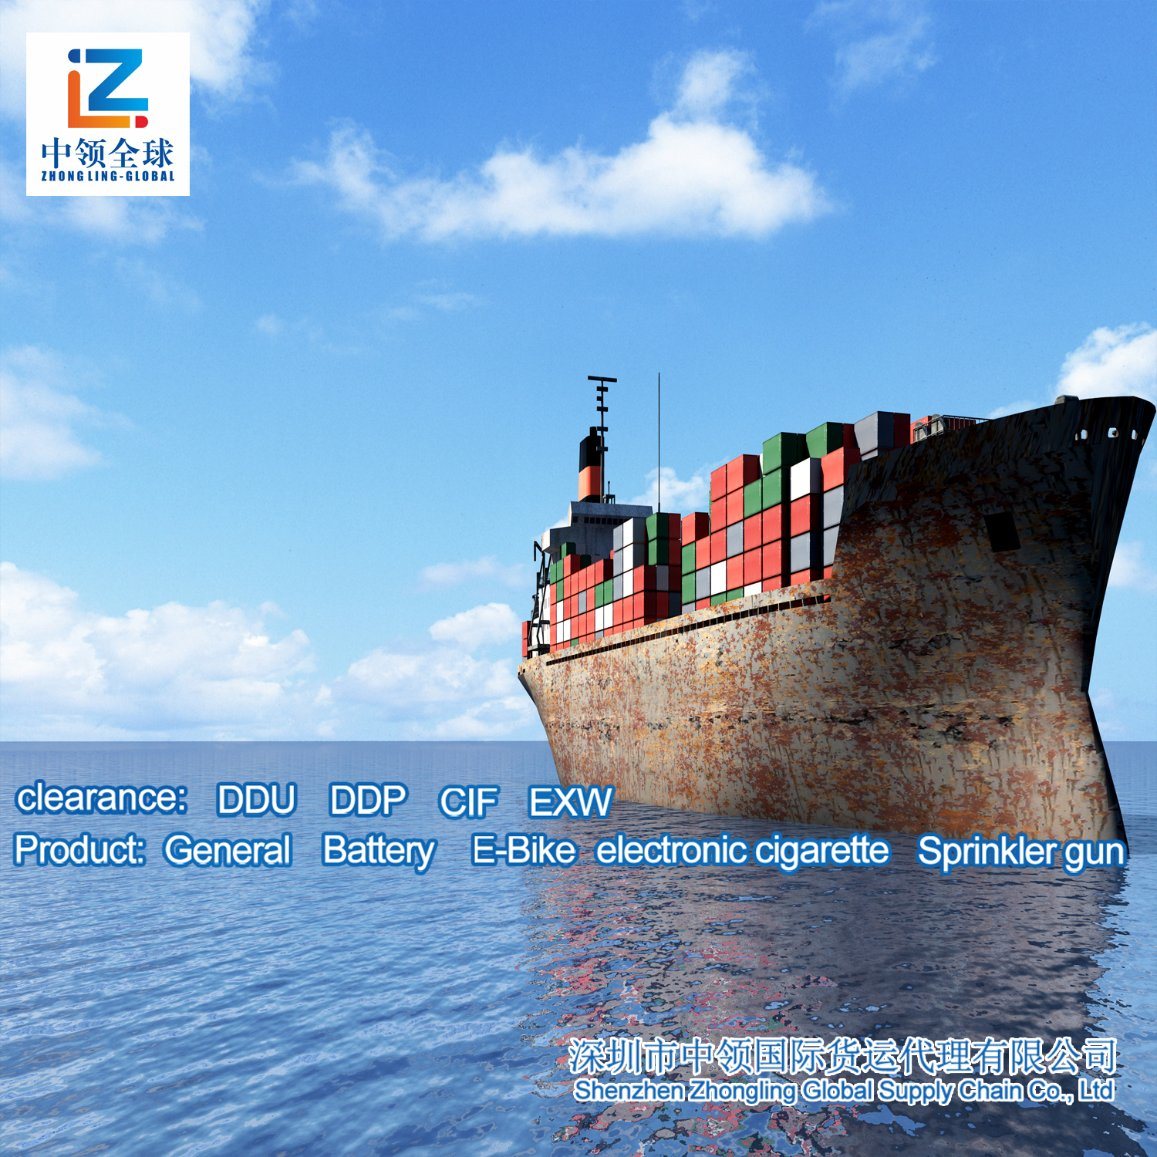 Shipping Lithium Batteries Overseas